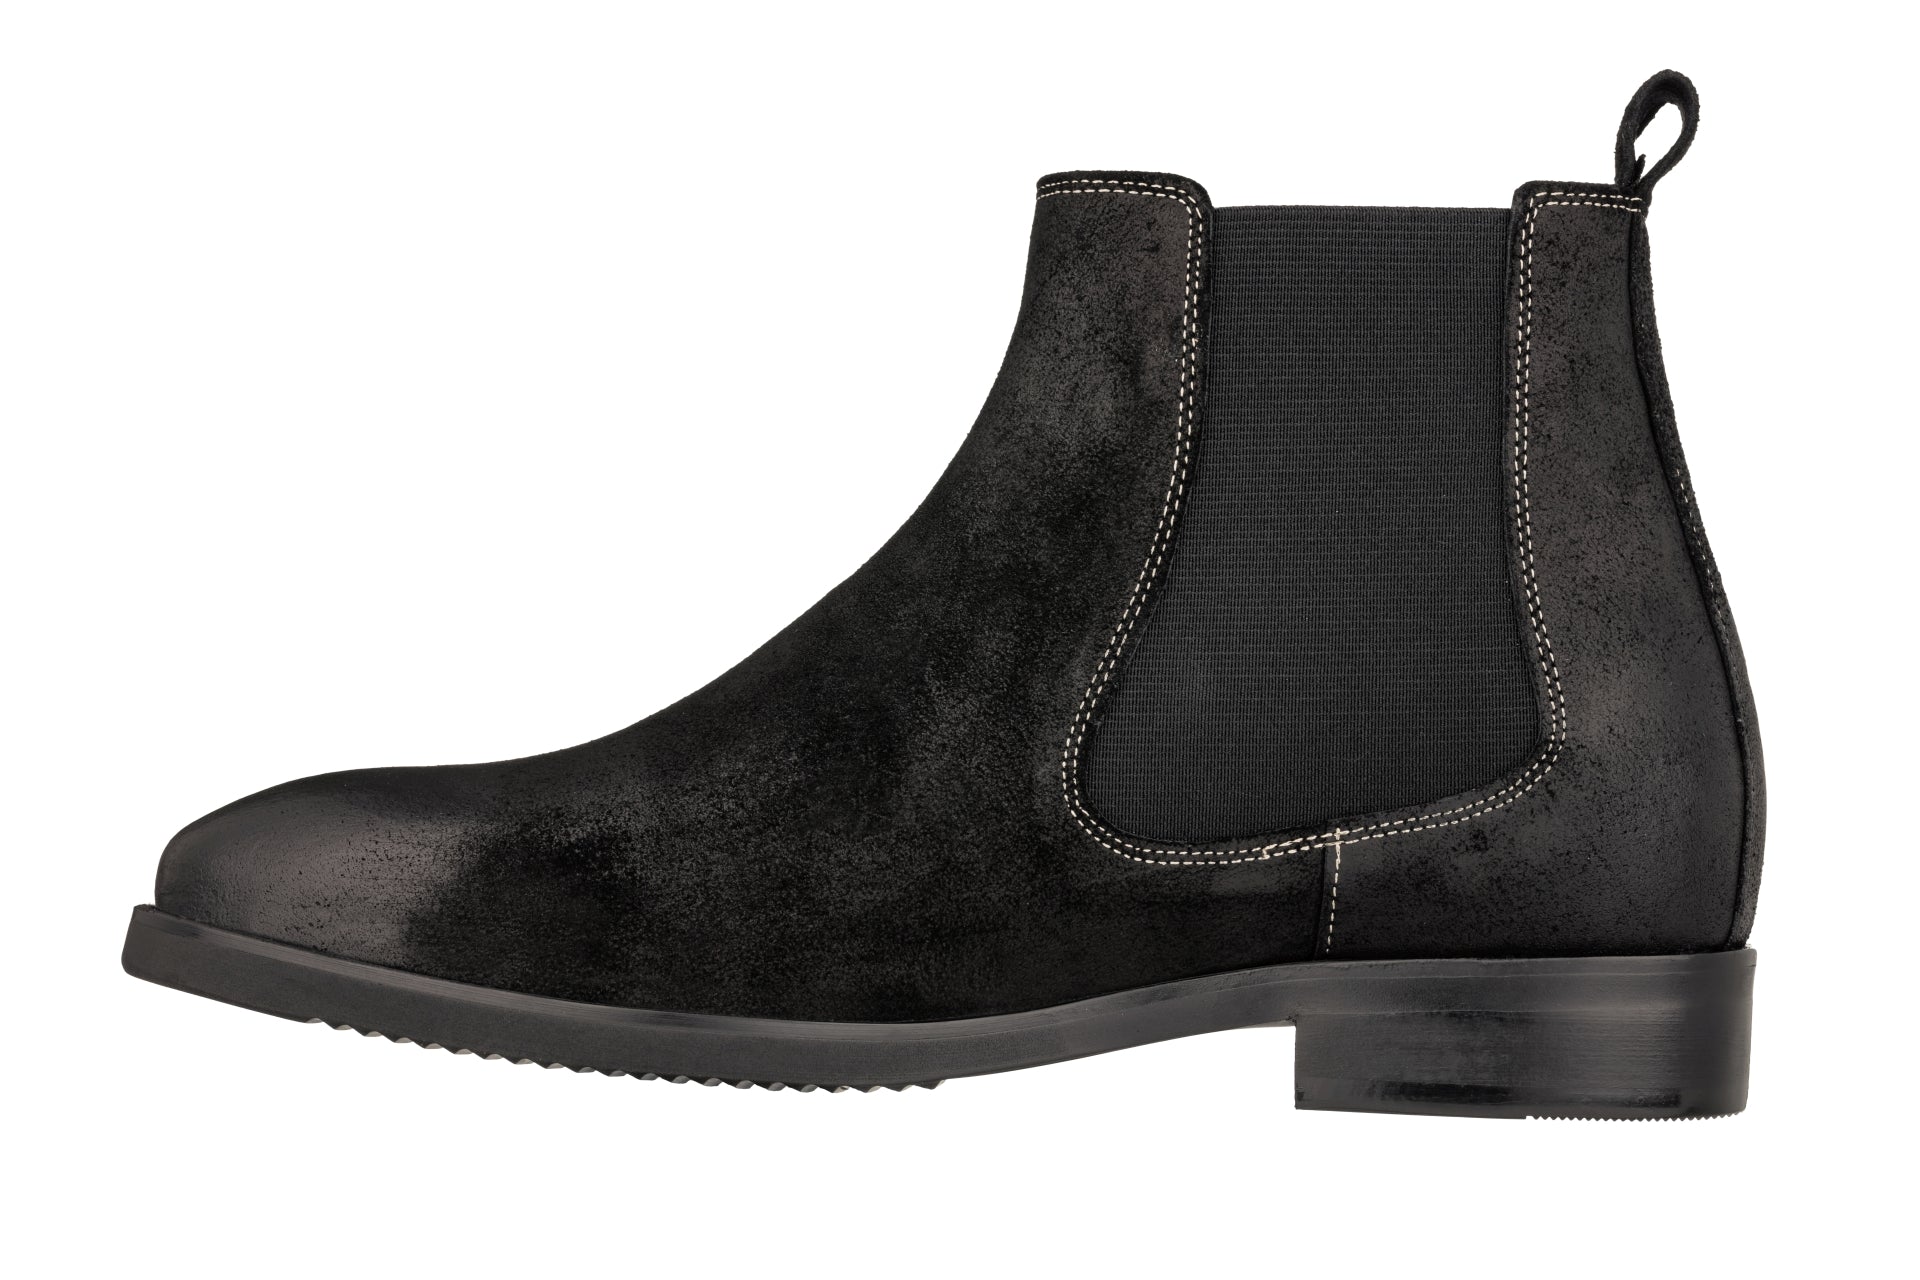 Elevator shoes height increase TOTO - K92081 - 3.0 Inches Taller (Nubuck Black) - Chelsea Ankle Boots